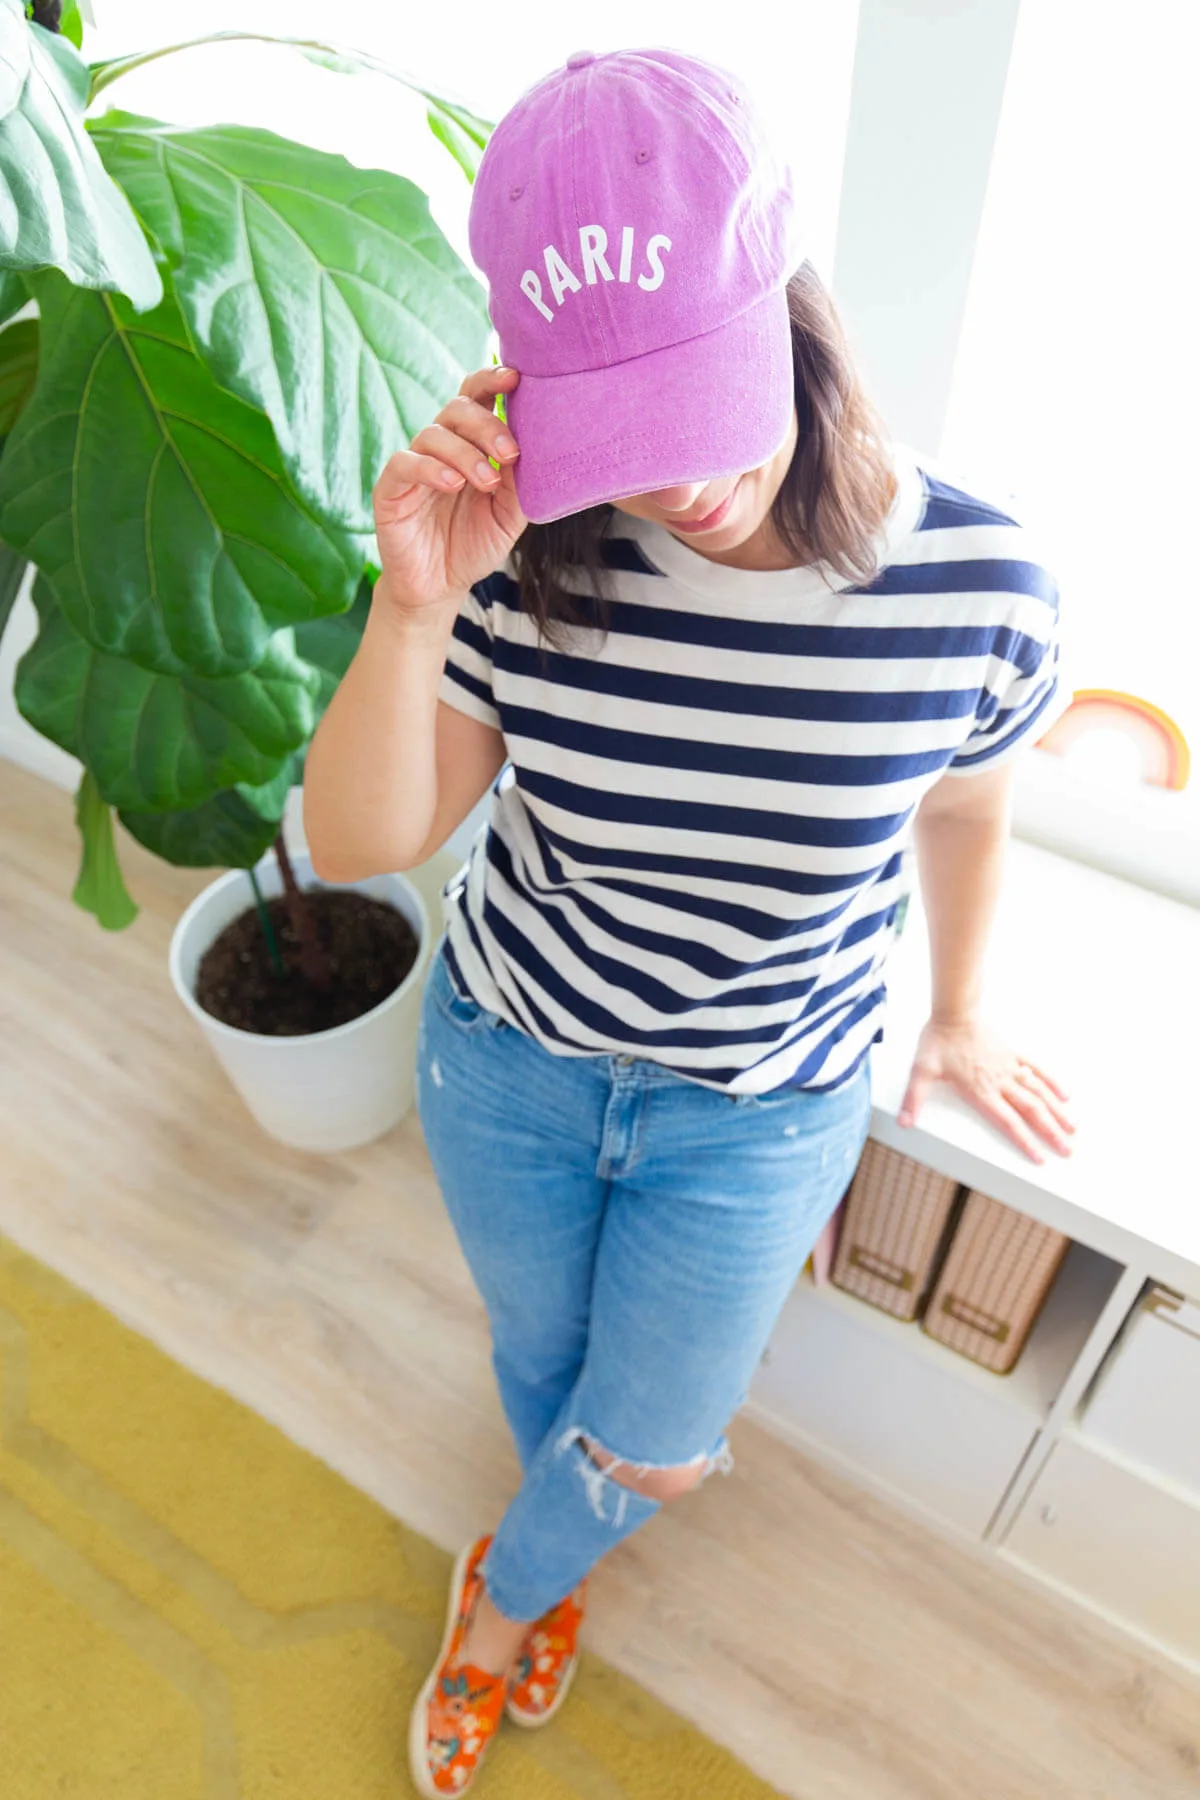 Woman in jeans and striped tshirt wearing a pink baseball cap with the word paris.